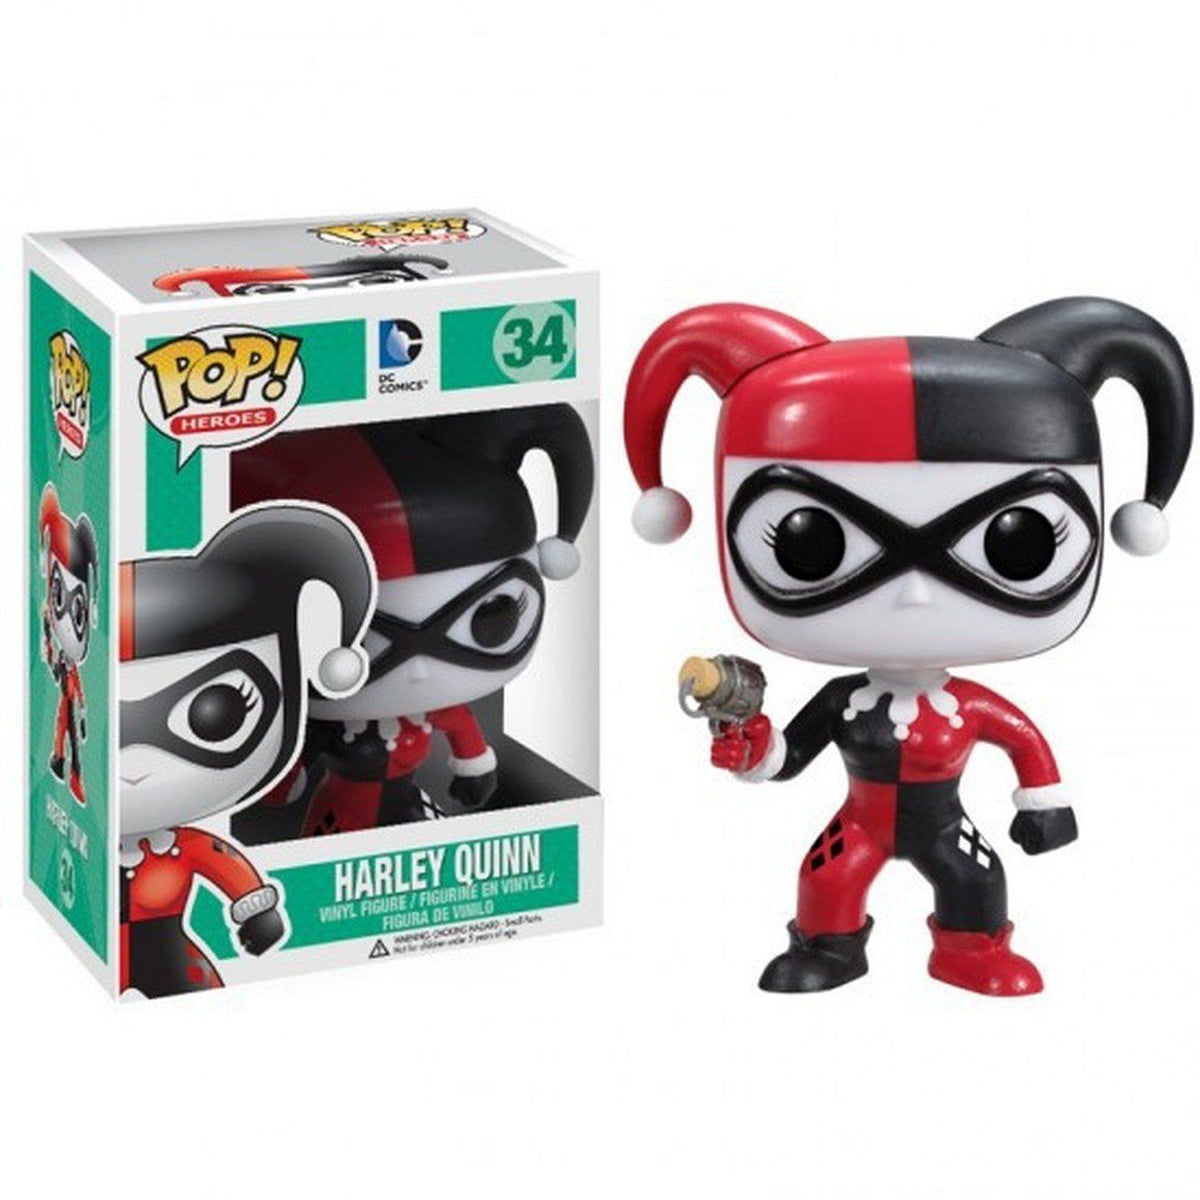 Funko Pop Harley Quinn With Mallet #45